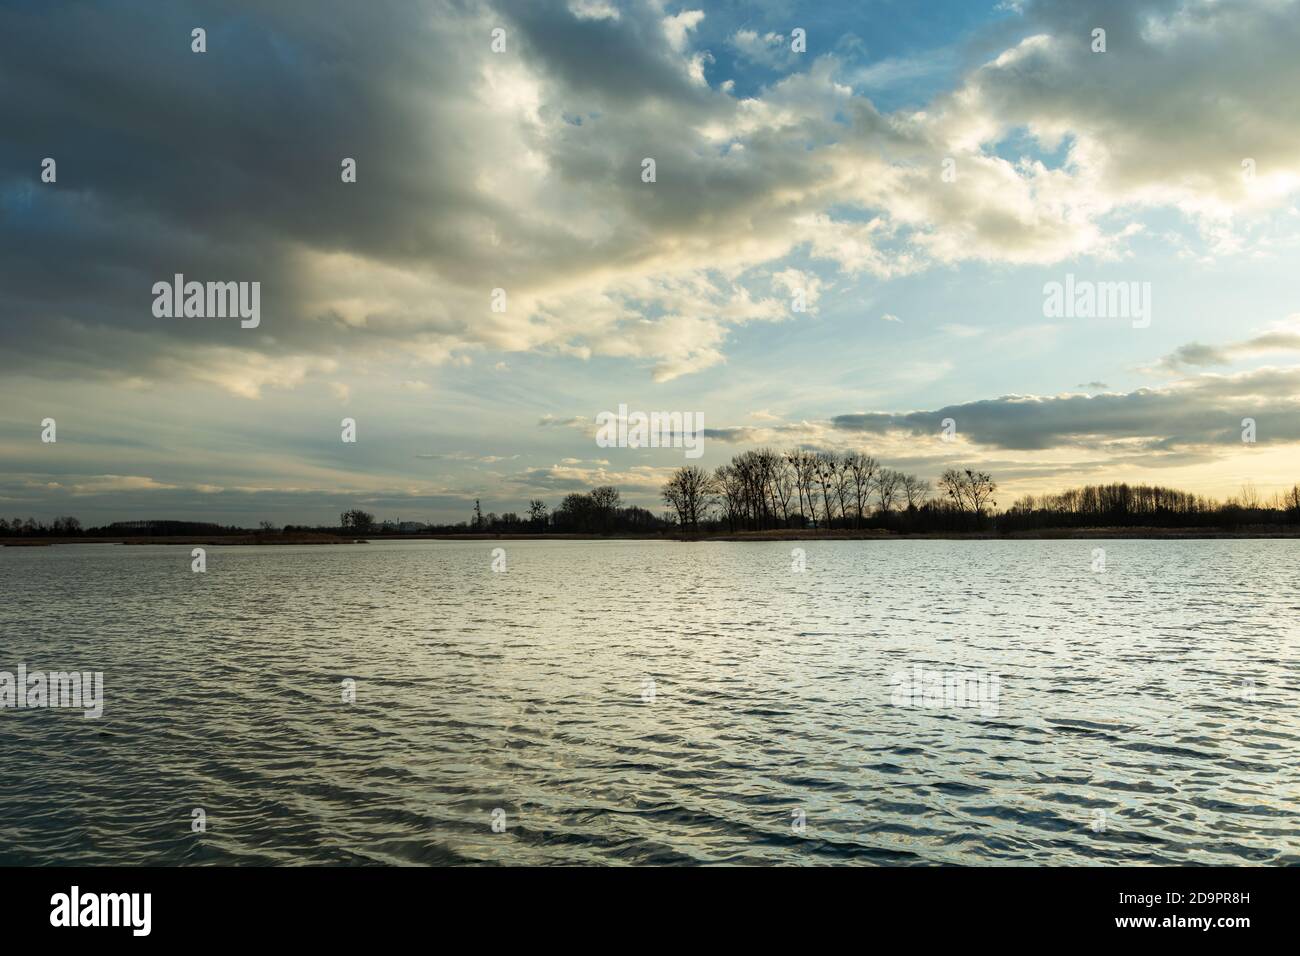 Evening clouds in the sky over a peaceful lake Stock Photo